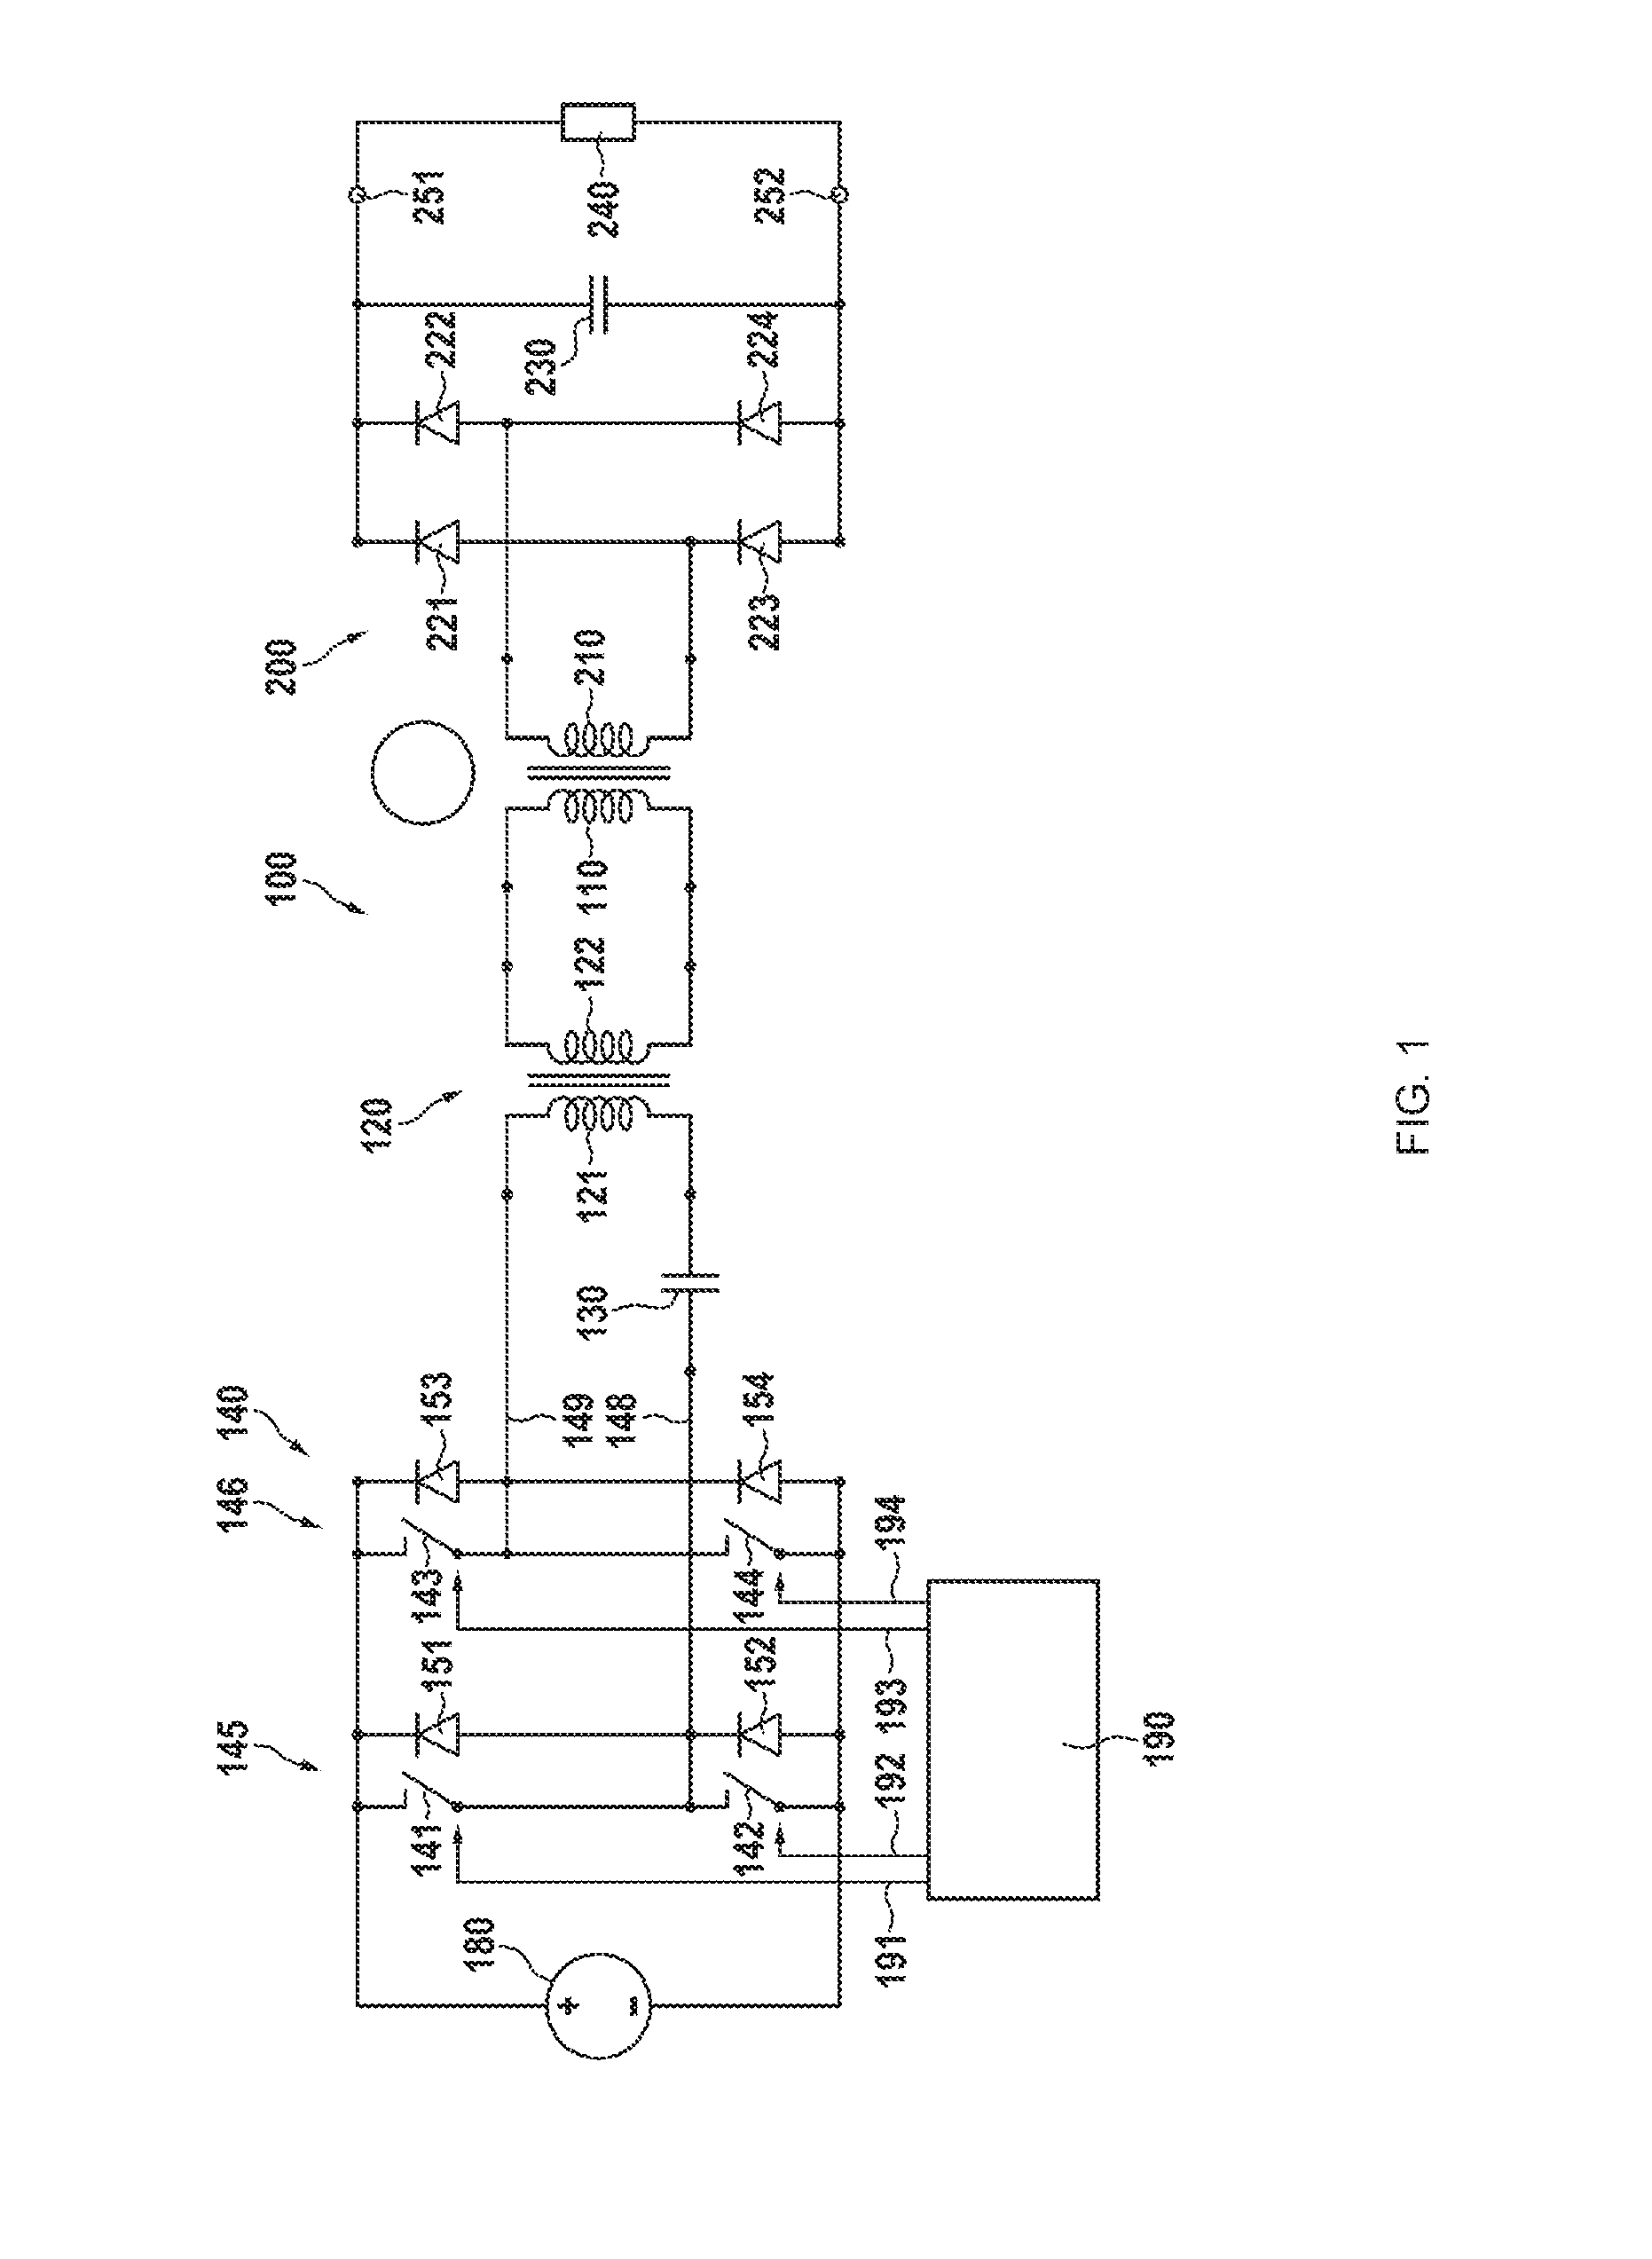 Inductive rotary joint with multimode inverter